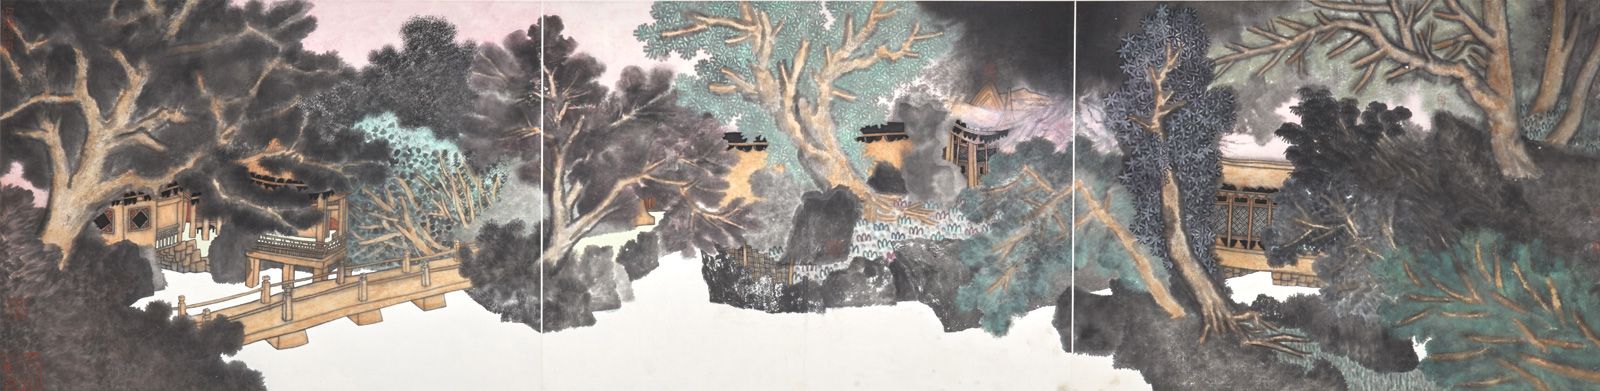 GUO Huawei (1983) 
The garden of century-old trees, 2012

Ink and acrylic on ric&hellip;